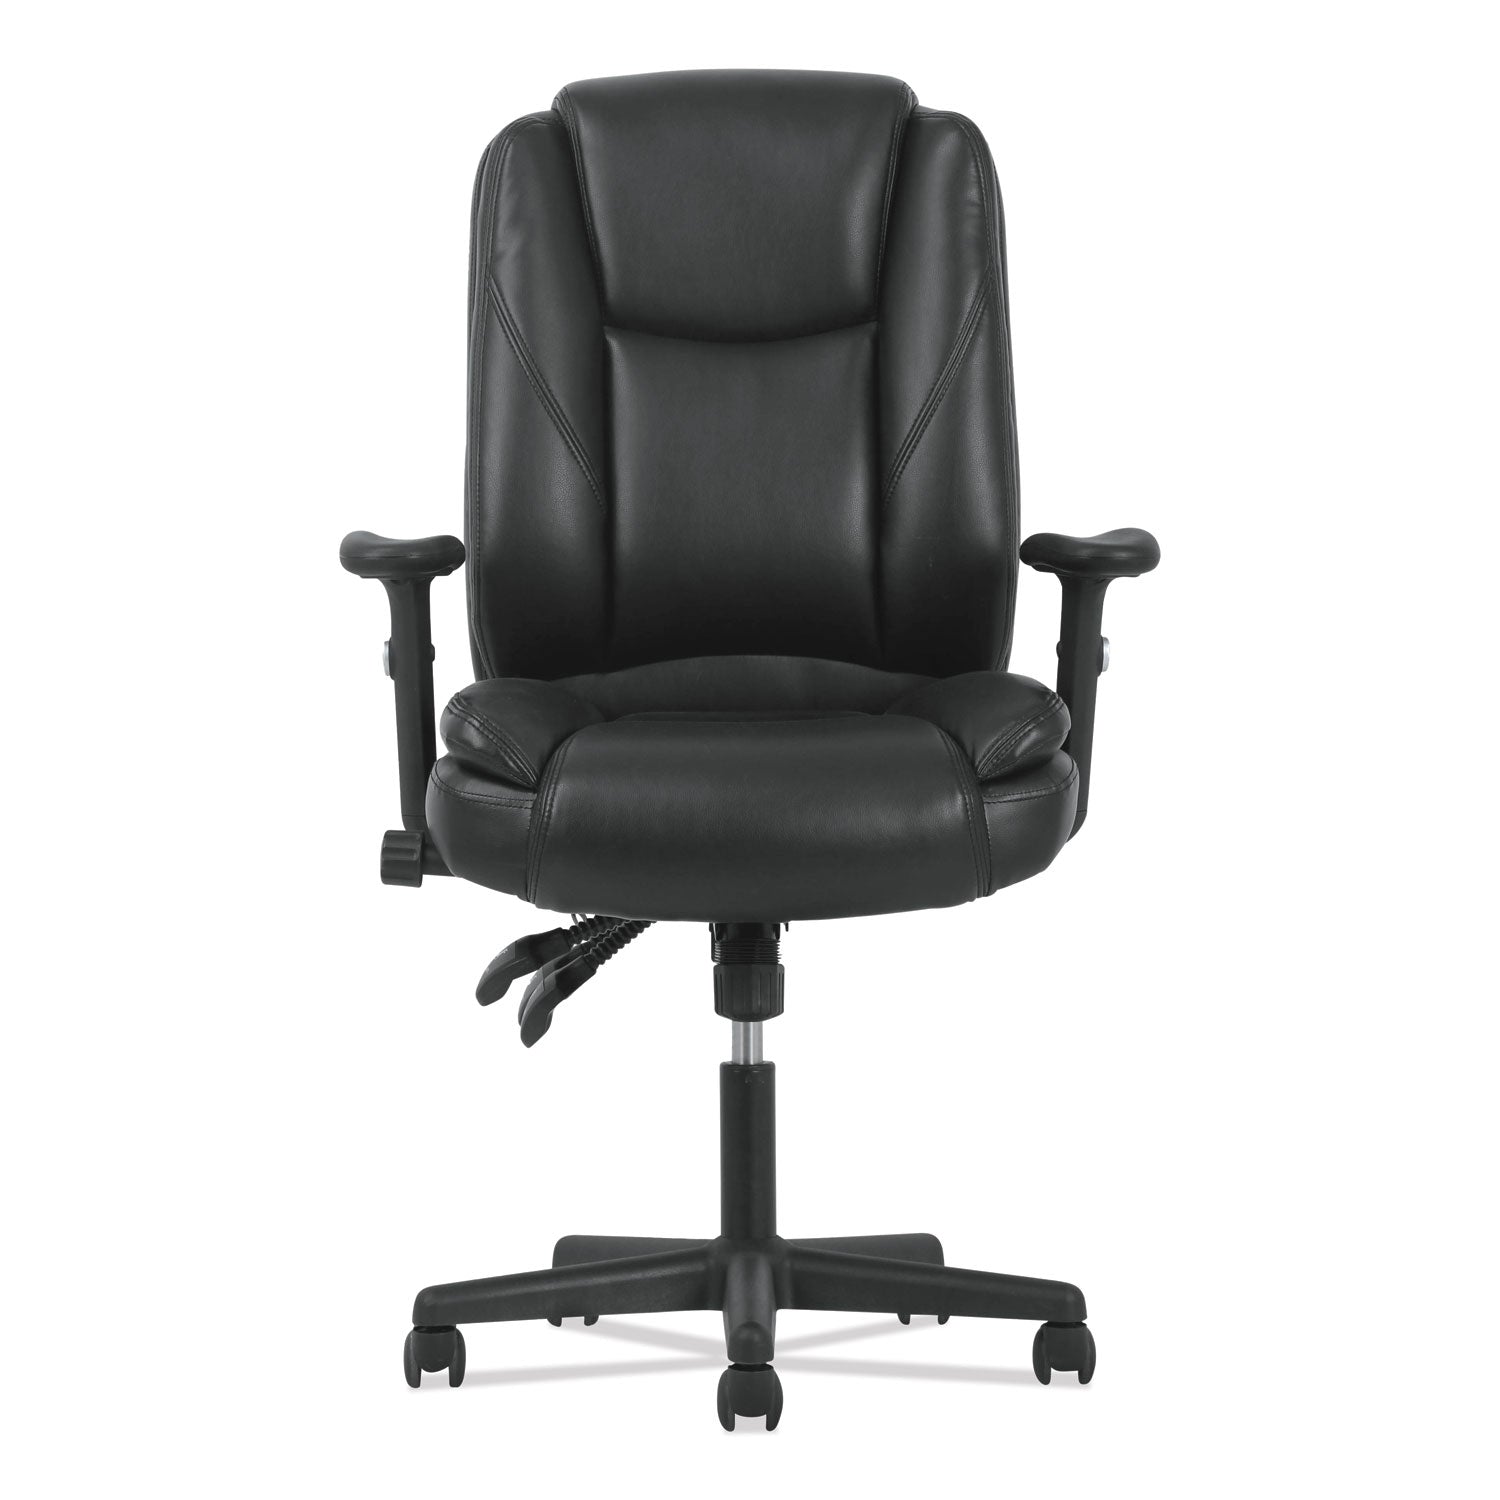 high-back-executive-chair-supports-up-to-225-lb-17-to-20-seat-height-black_bsxvst331 - 2